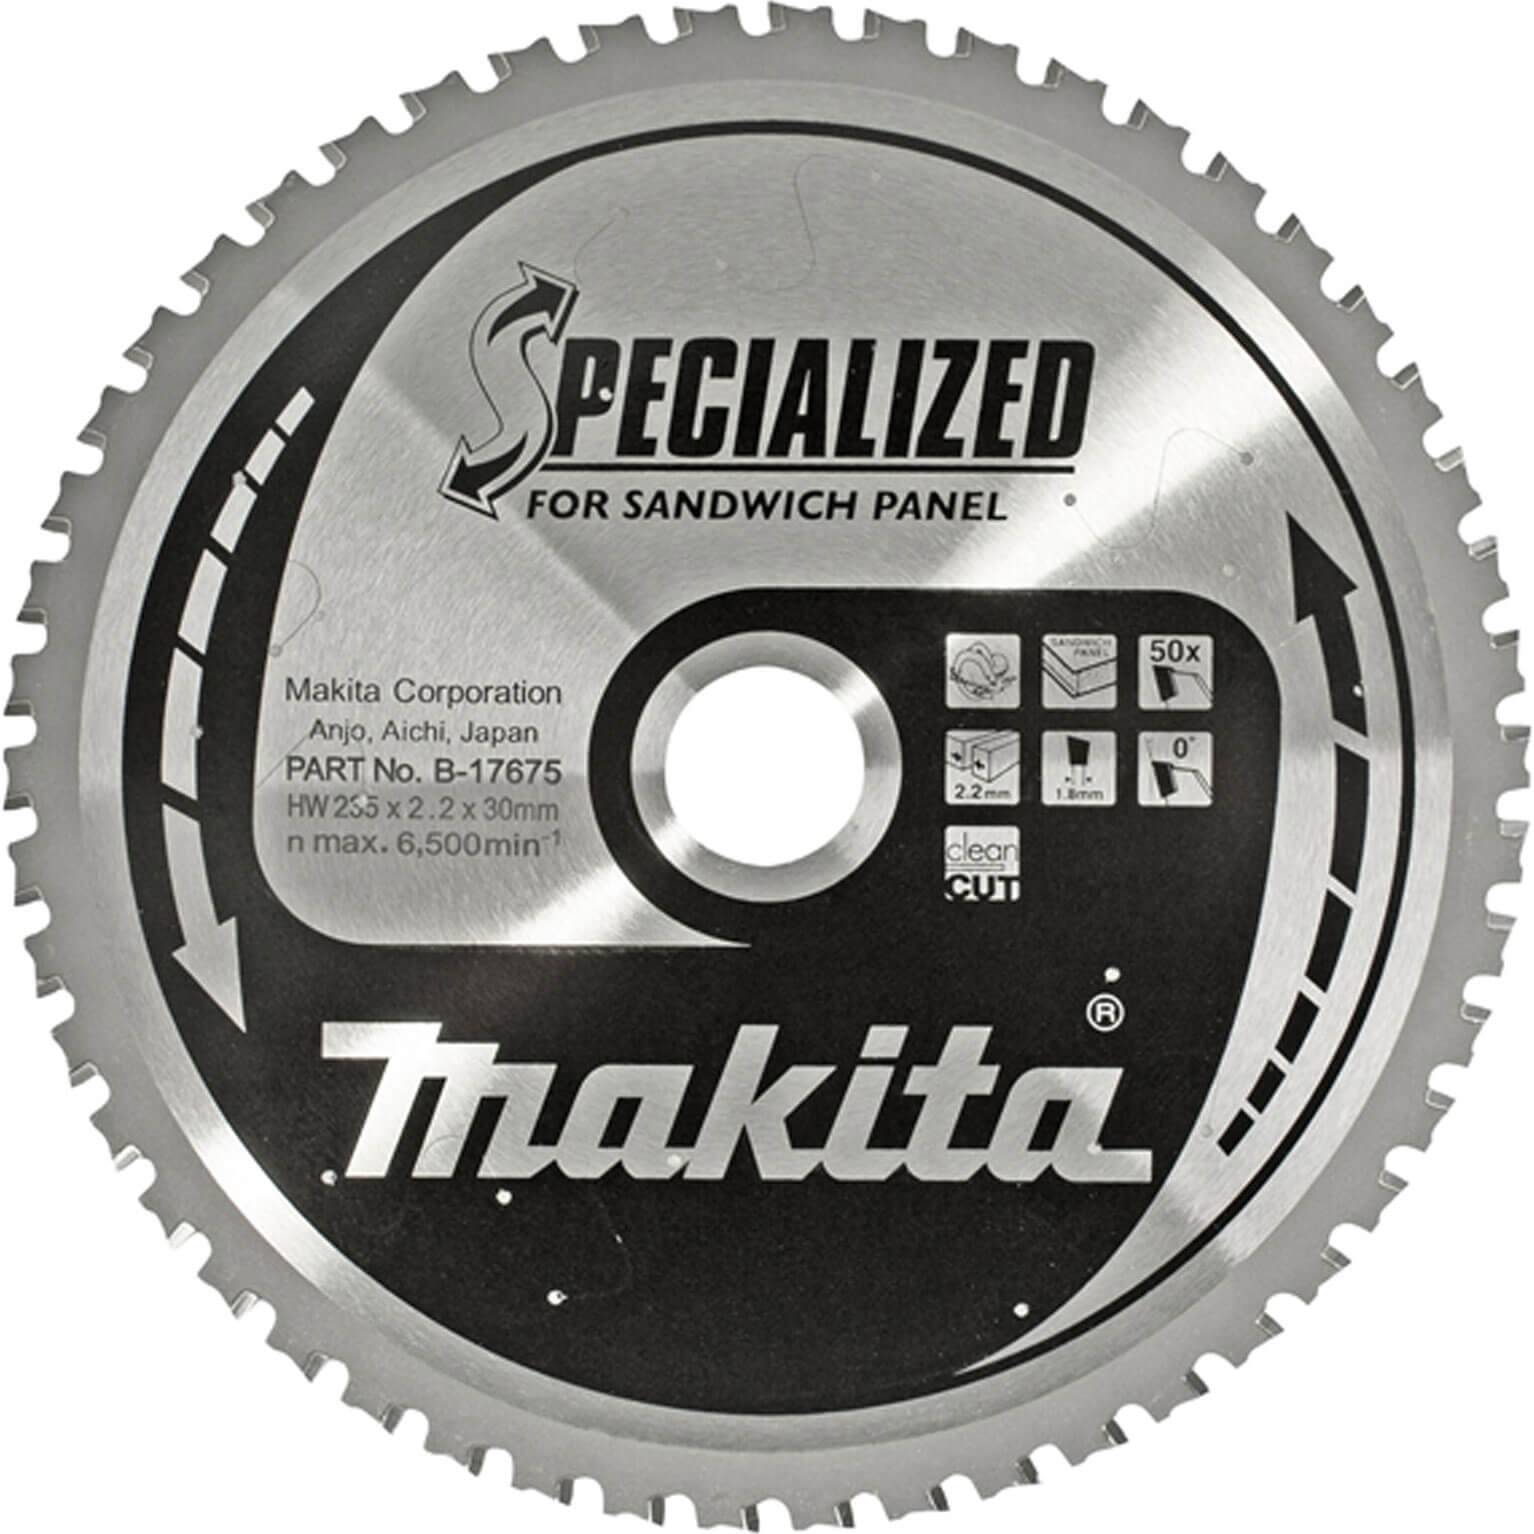 Image of Makita SPECIALIZED Sandwich Panel Cutting Saw Blade 355mm 80T 30mm